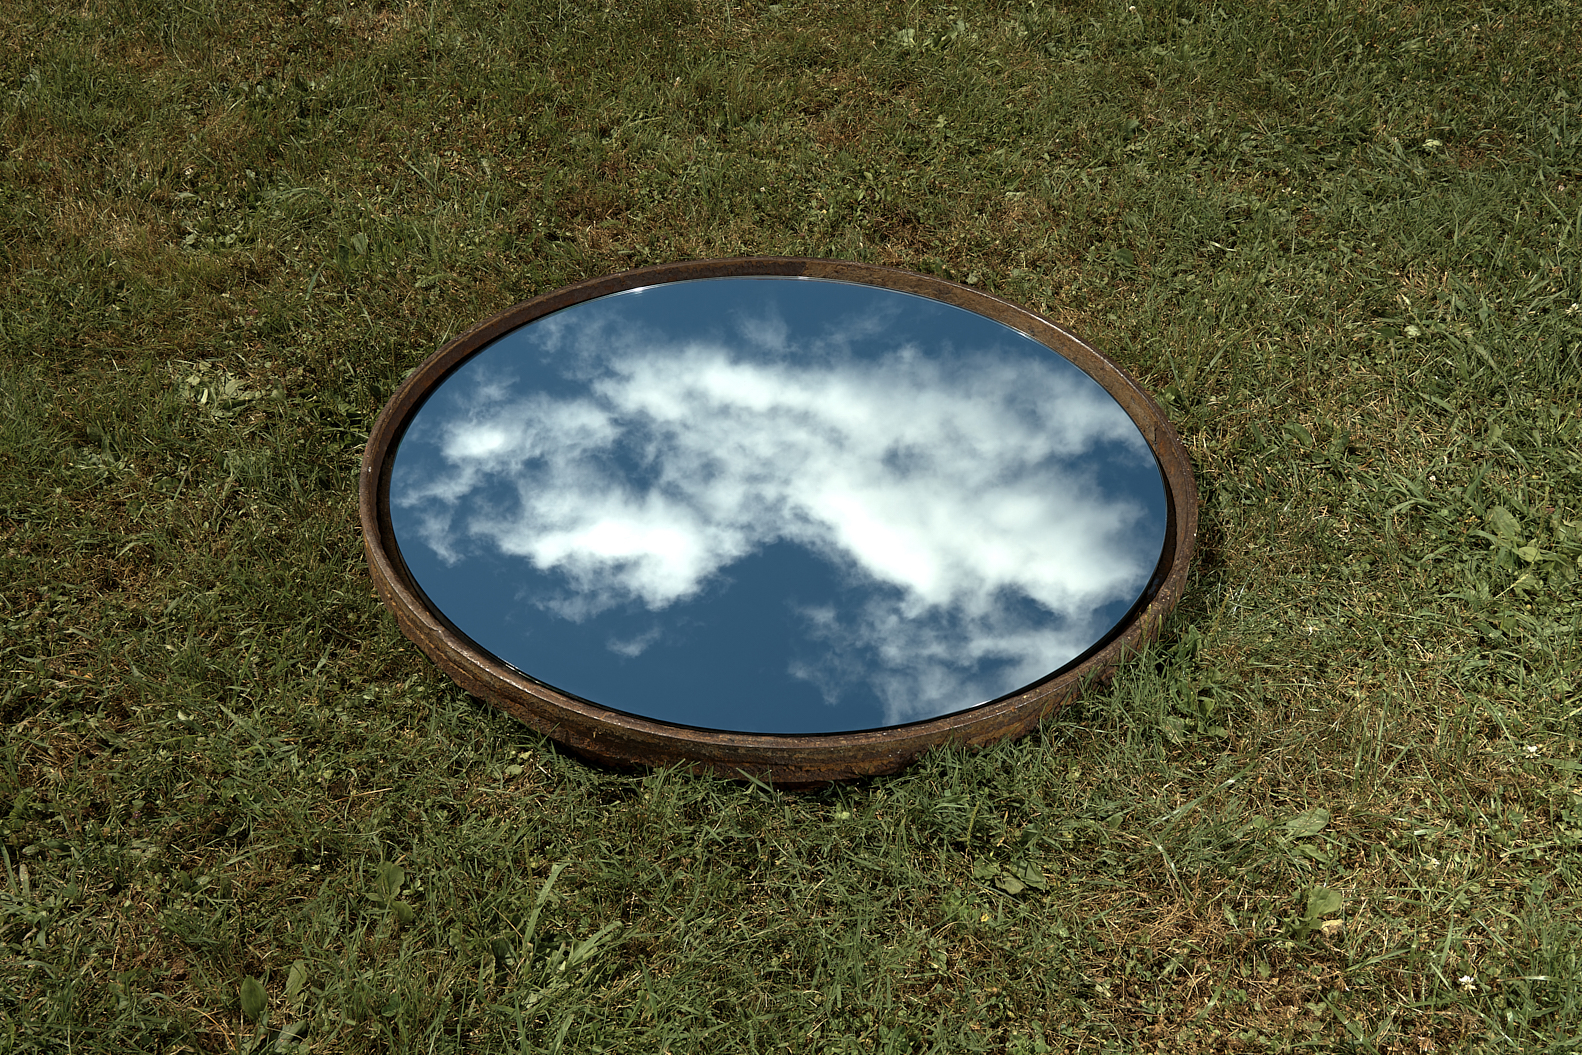 a mirror on the grass.